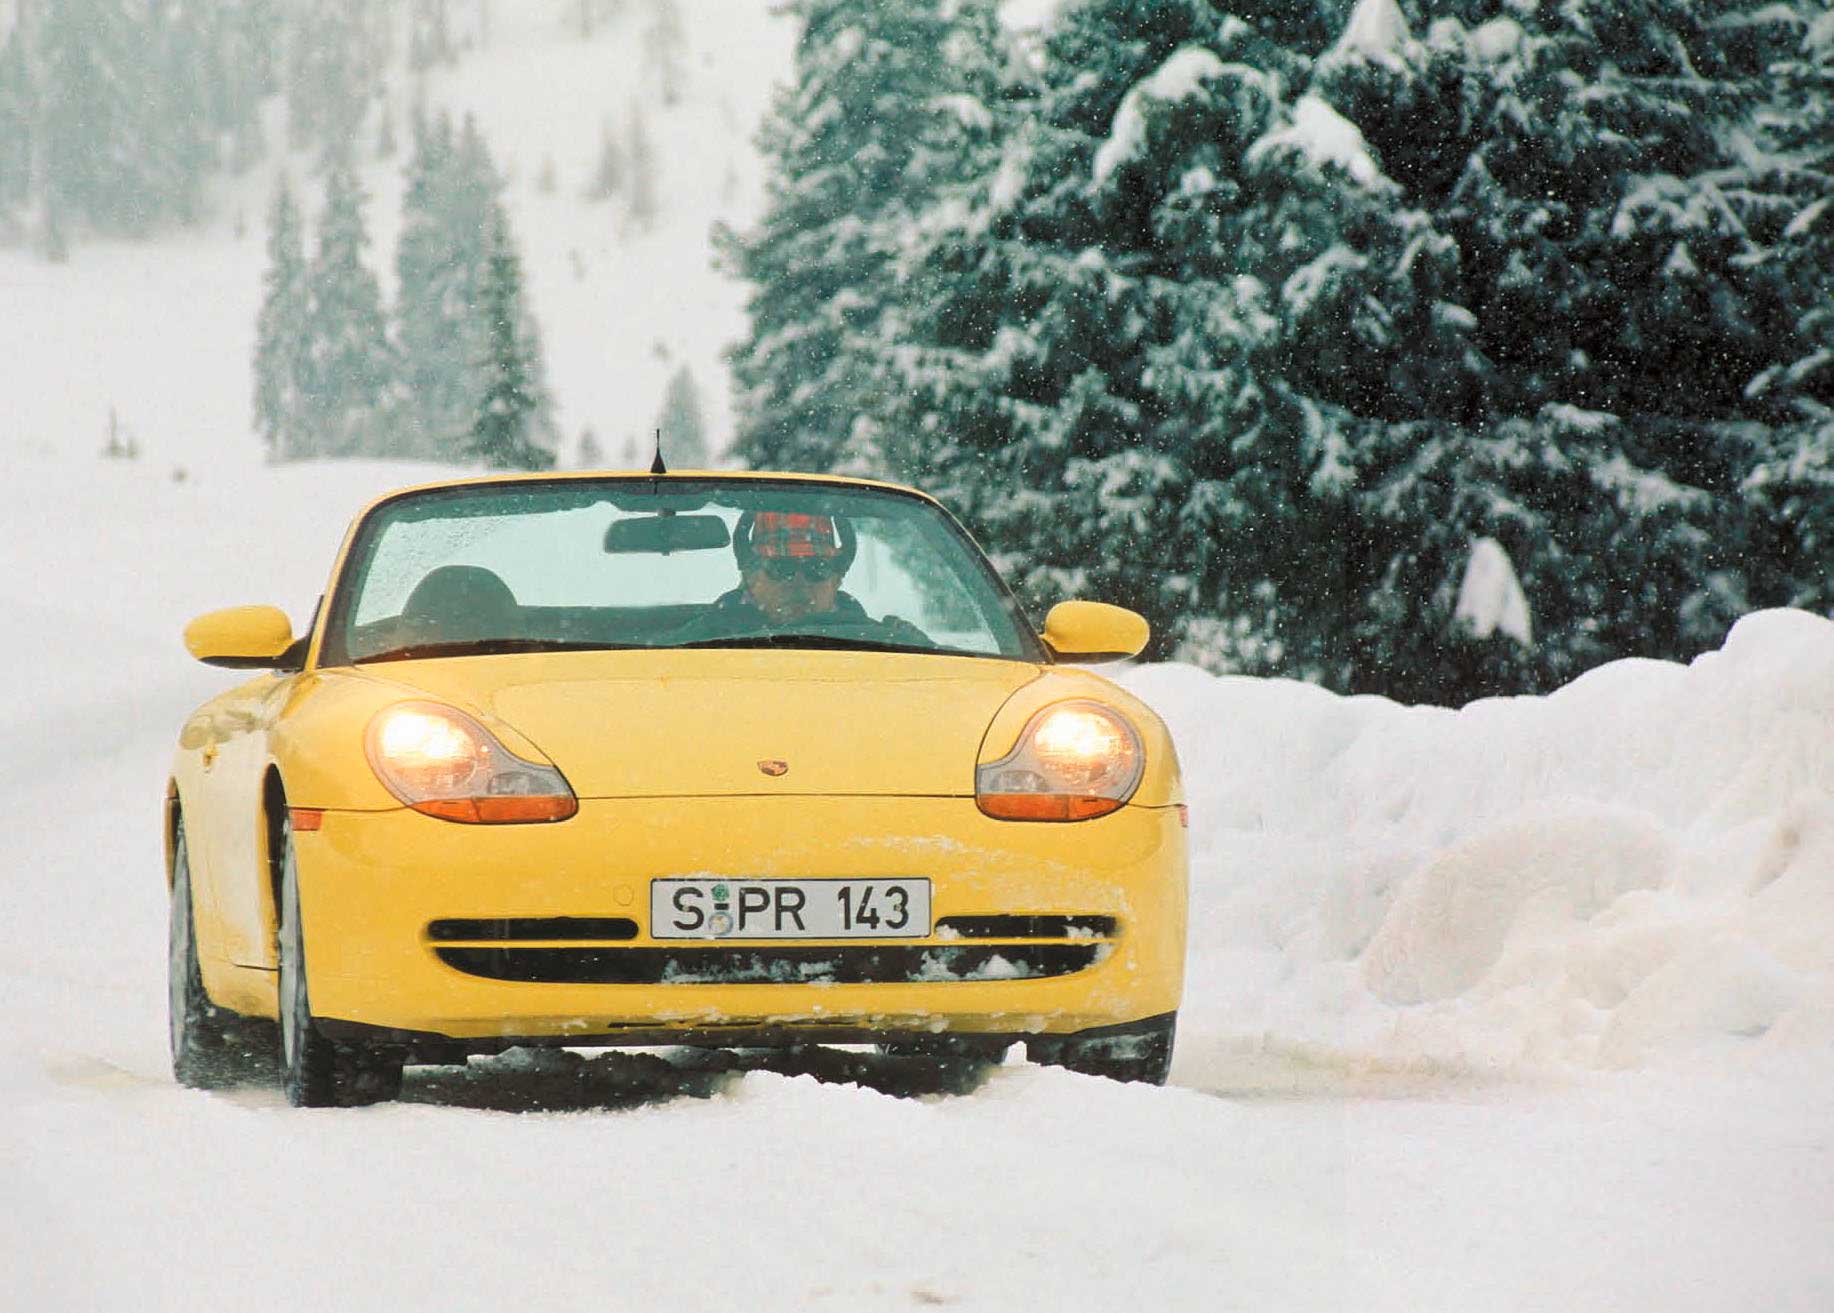 Horst Marchart’s innovative idea to create two cars using the same face challenged engineers and stylists alike. The result, the 986 Boxster, and this, the 996 model, saved Porsche millions but initially confused some buyers. Porsche Archiv